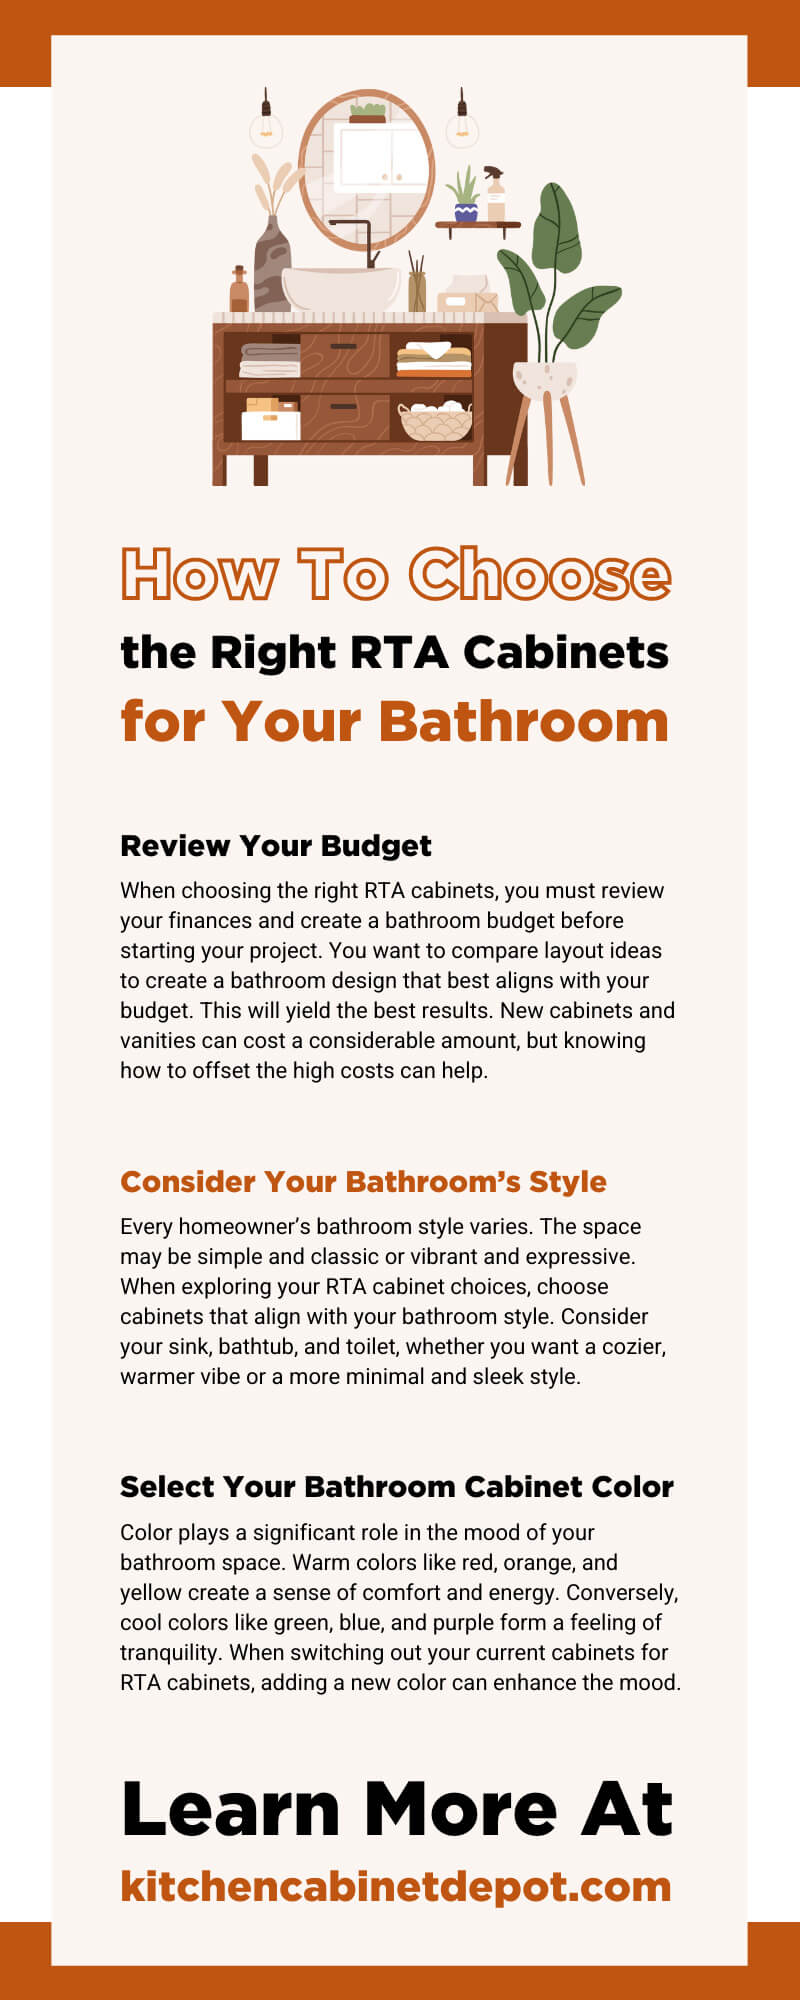 How to choose the right RTA cabinets for your bathroom